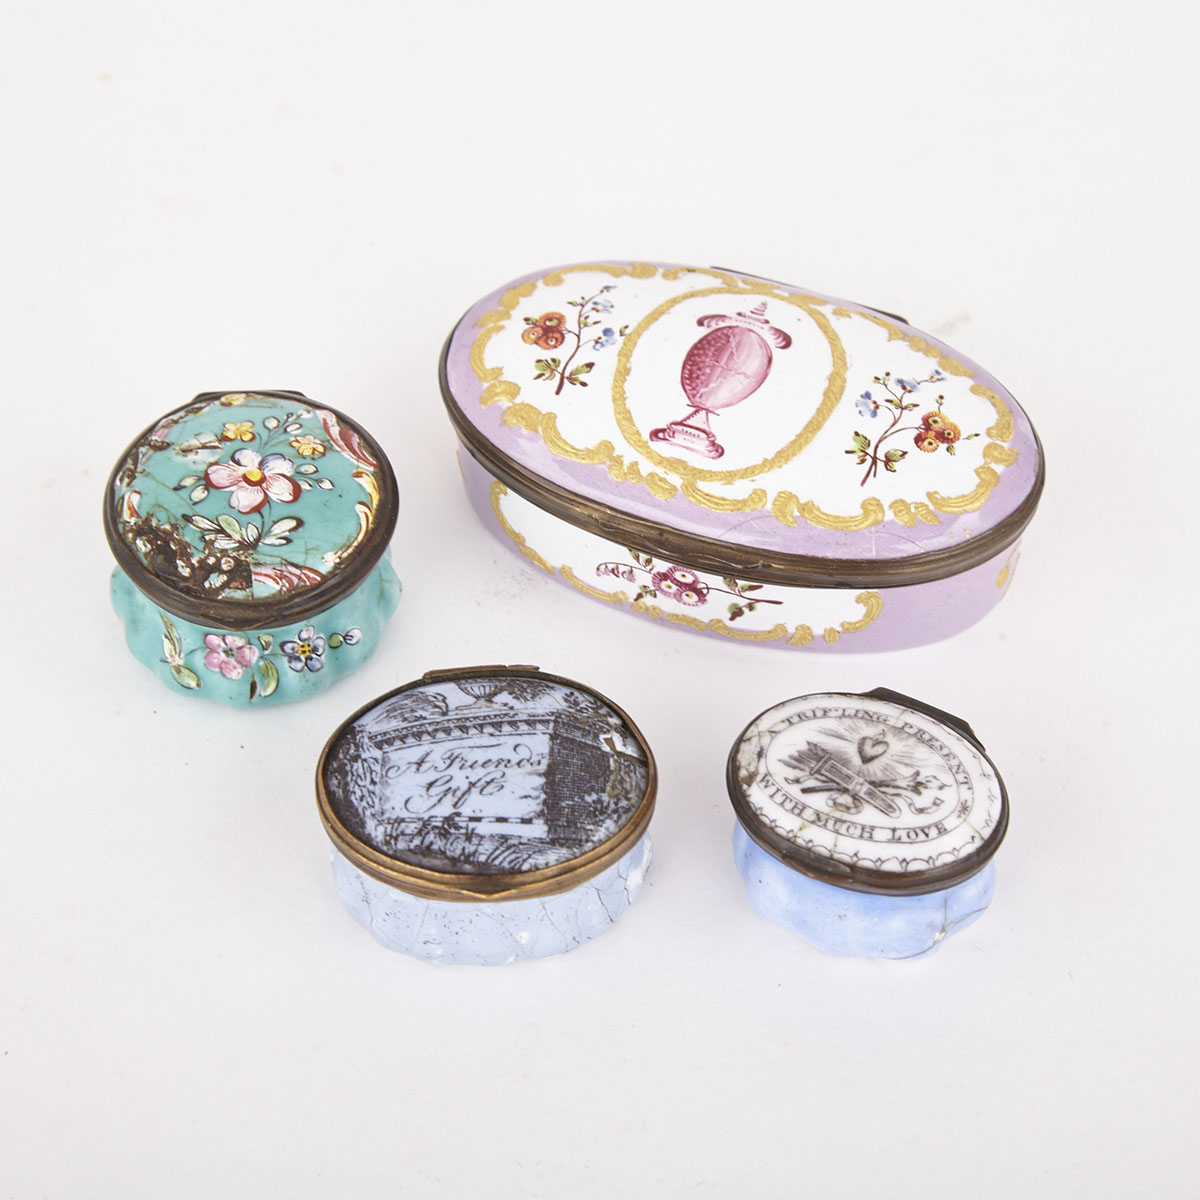 Four Battersea Enamel Patch and Snuff Boxes, 18th century